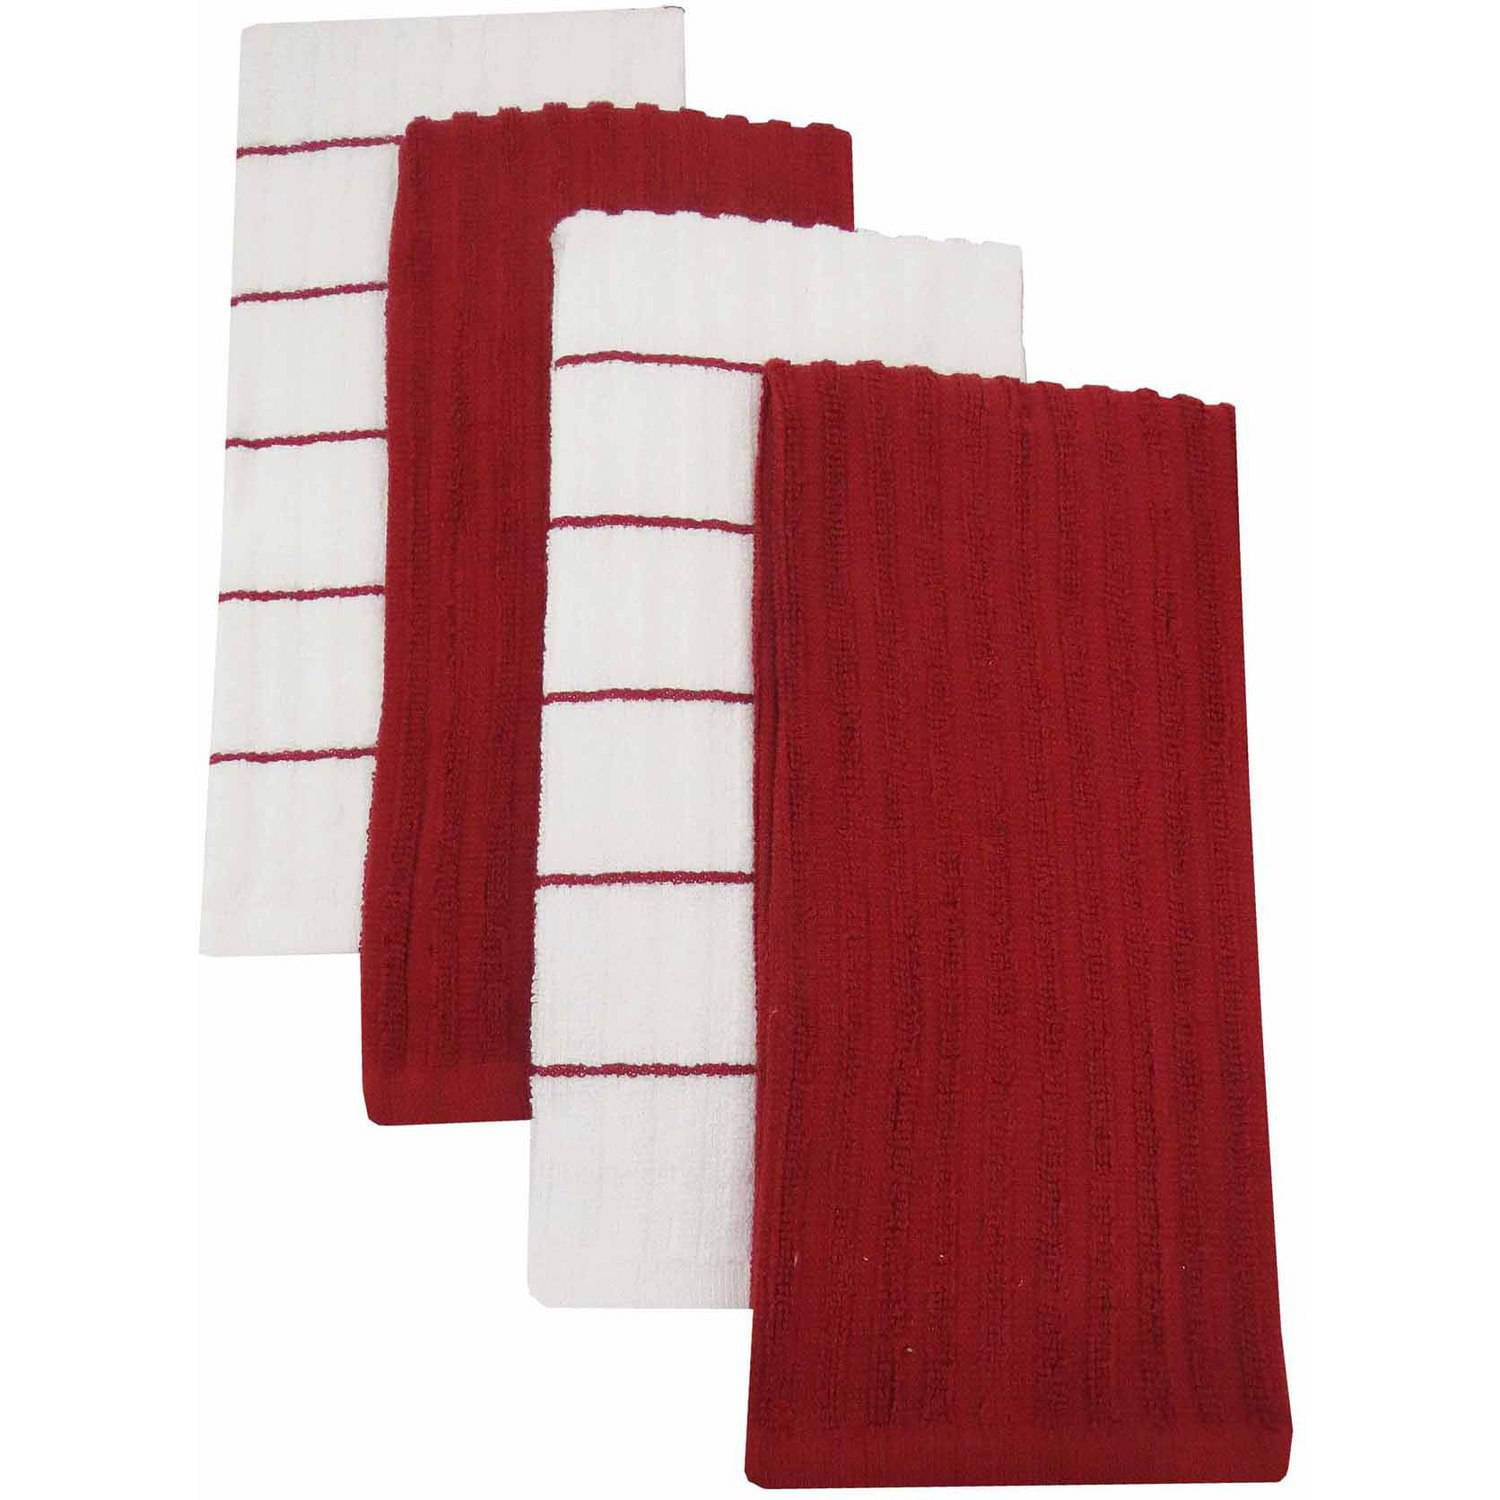 Mainstays Kitchen Dish Cloth - Red - 12 x 12 in